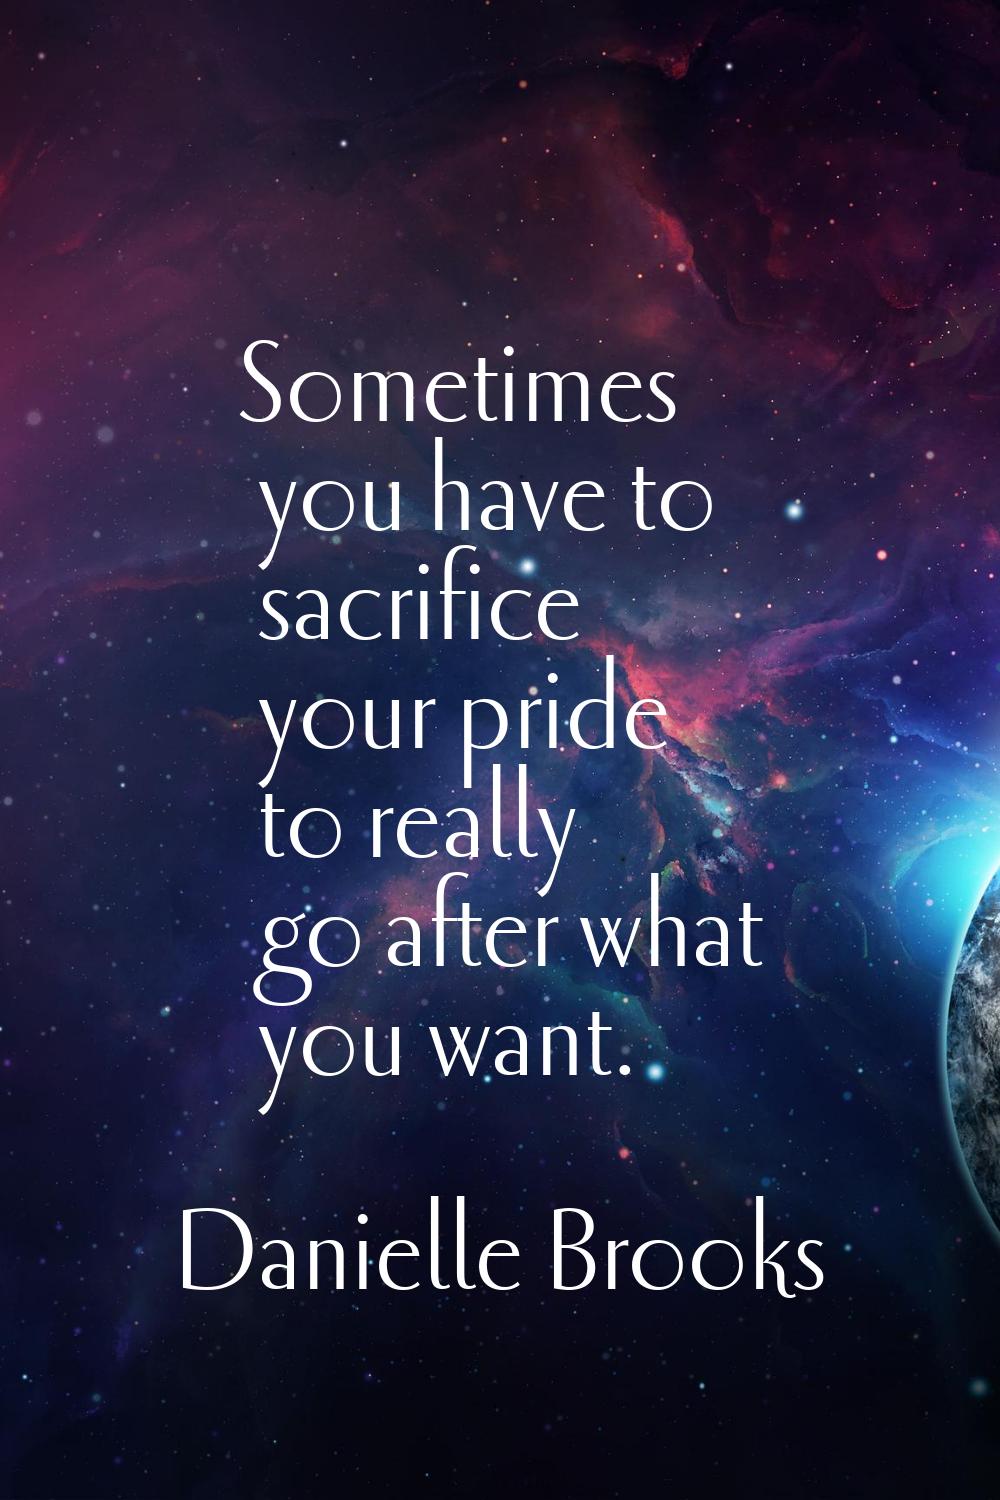 Sometimes you have to sacrifice your pride to really go after what you want.